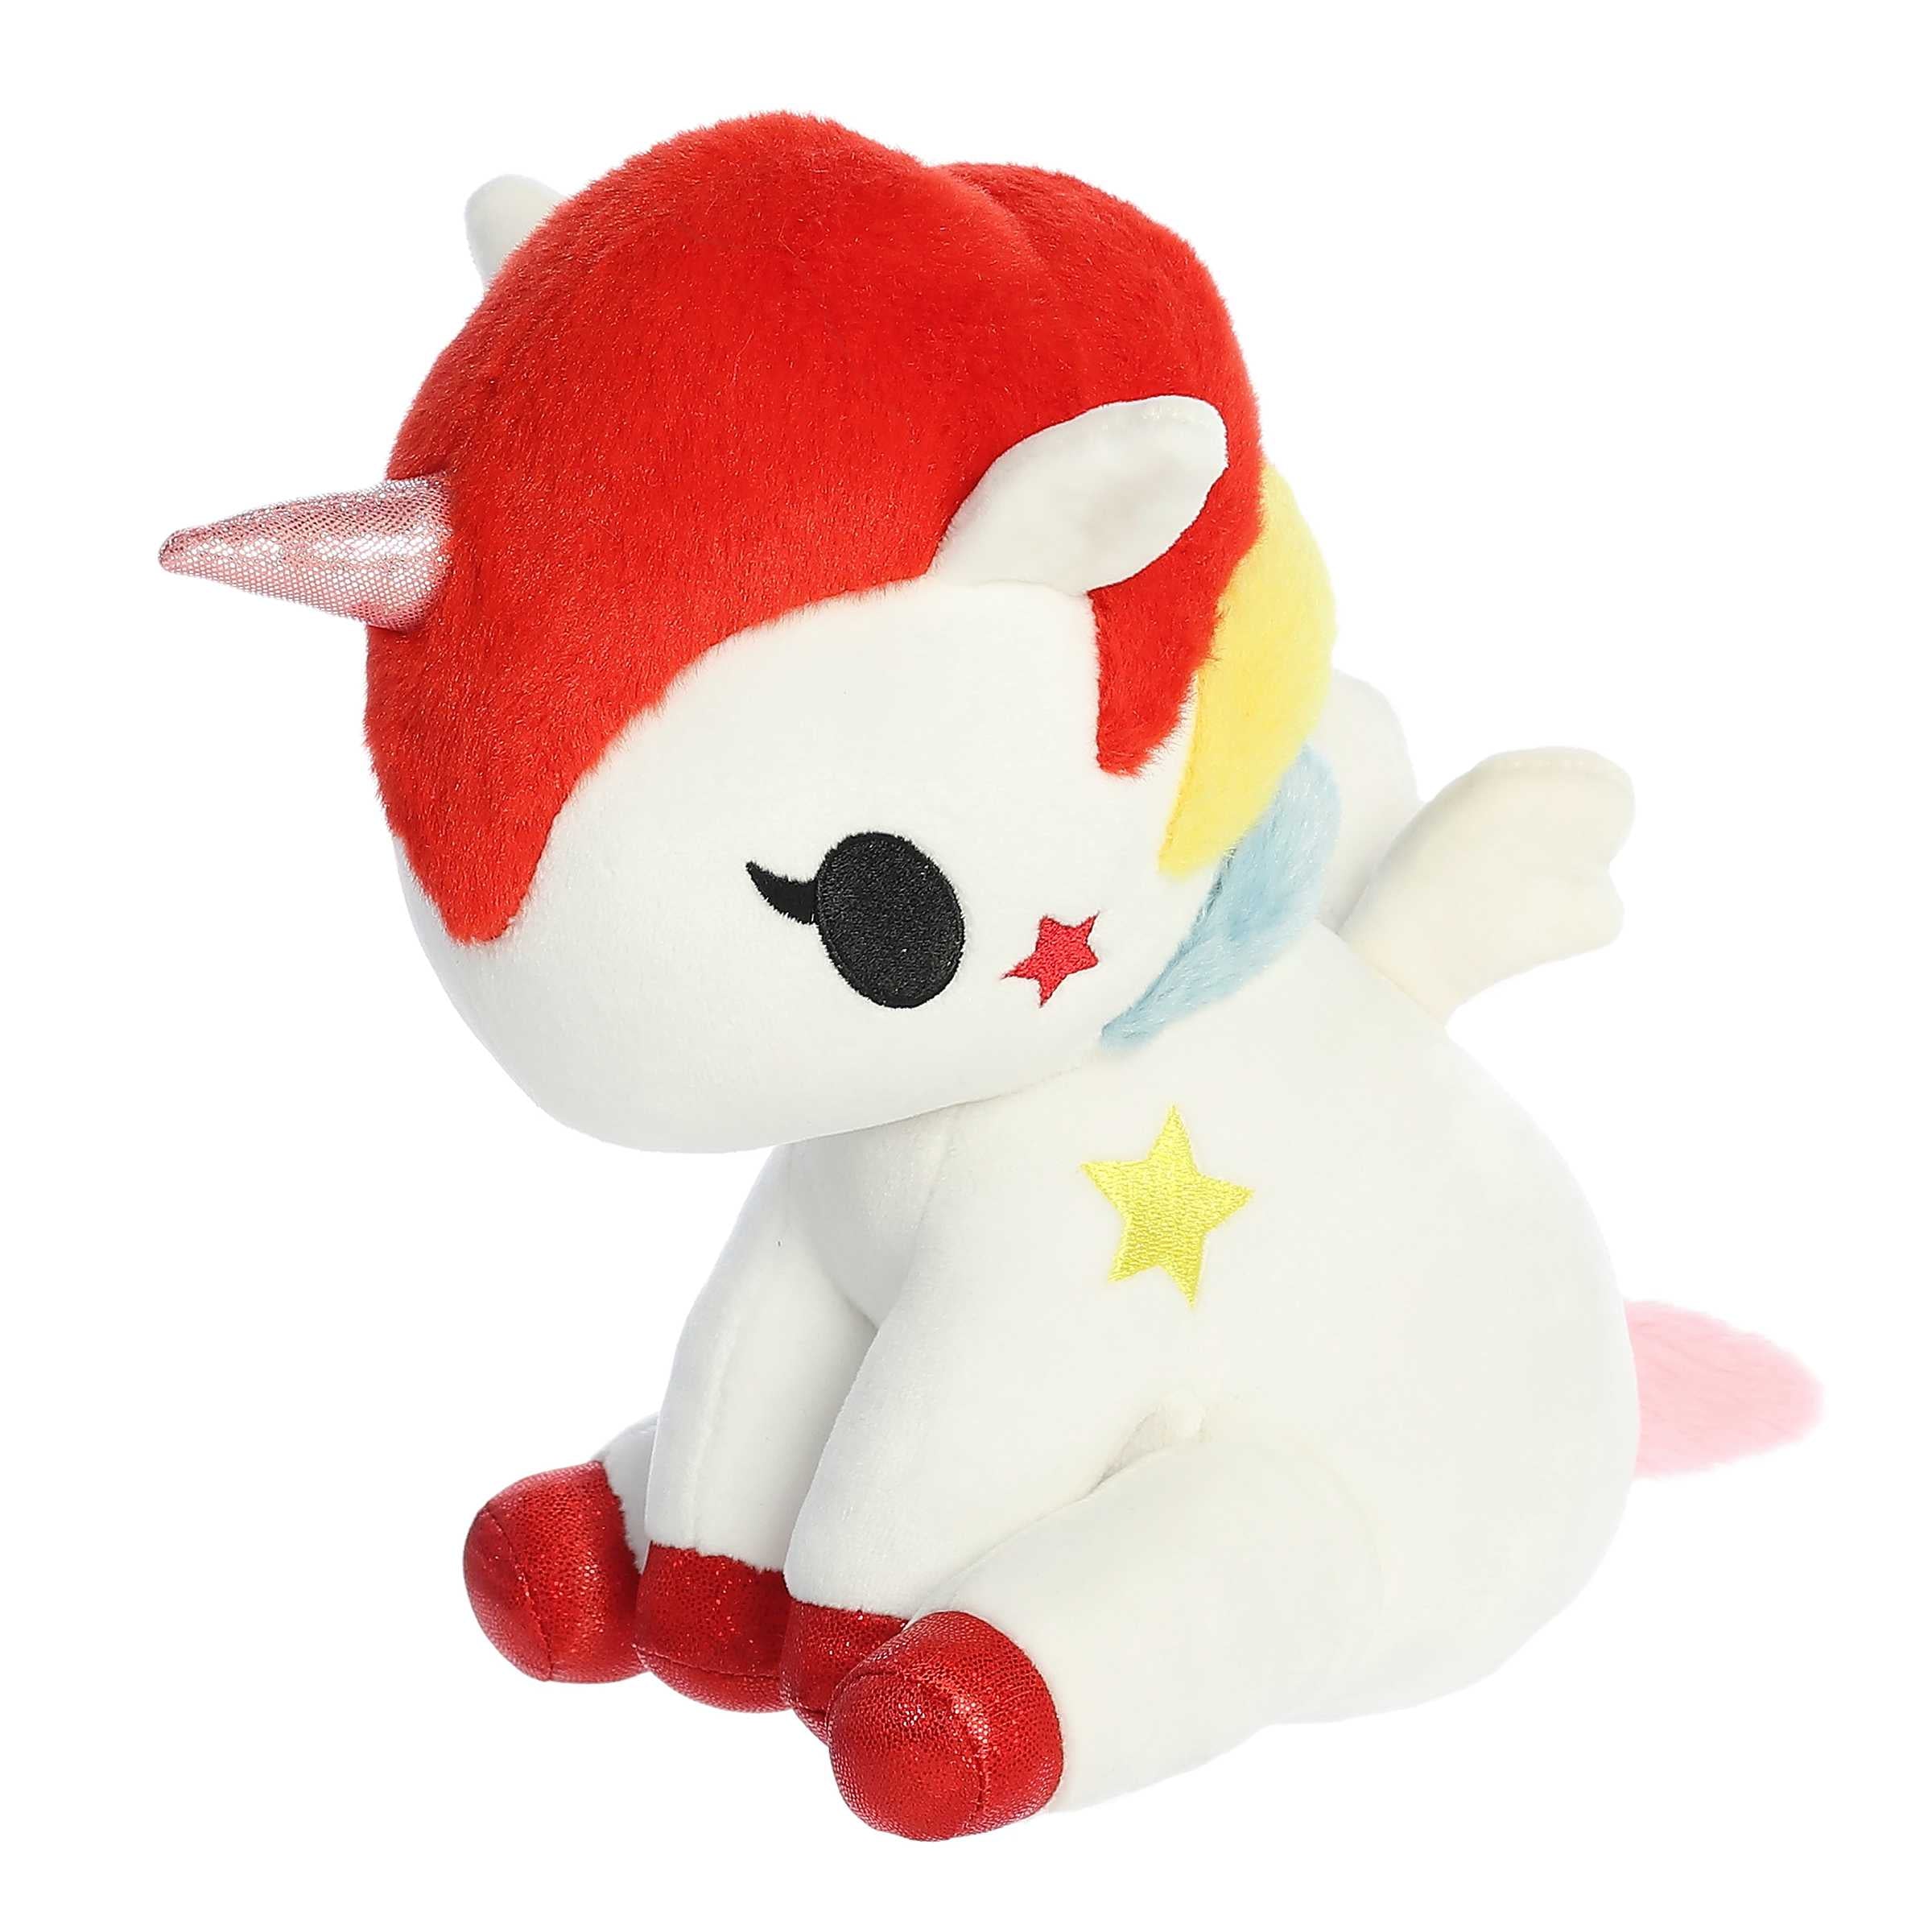 Cute colorful unicorn plush in a sitting position with white body and colorful fur, sparkly hooves and detailed embroidery.